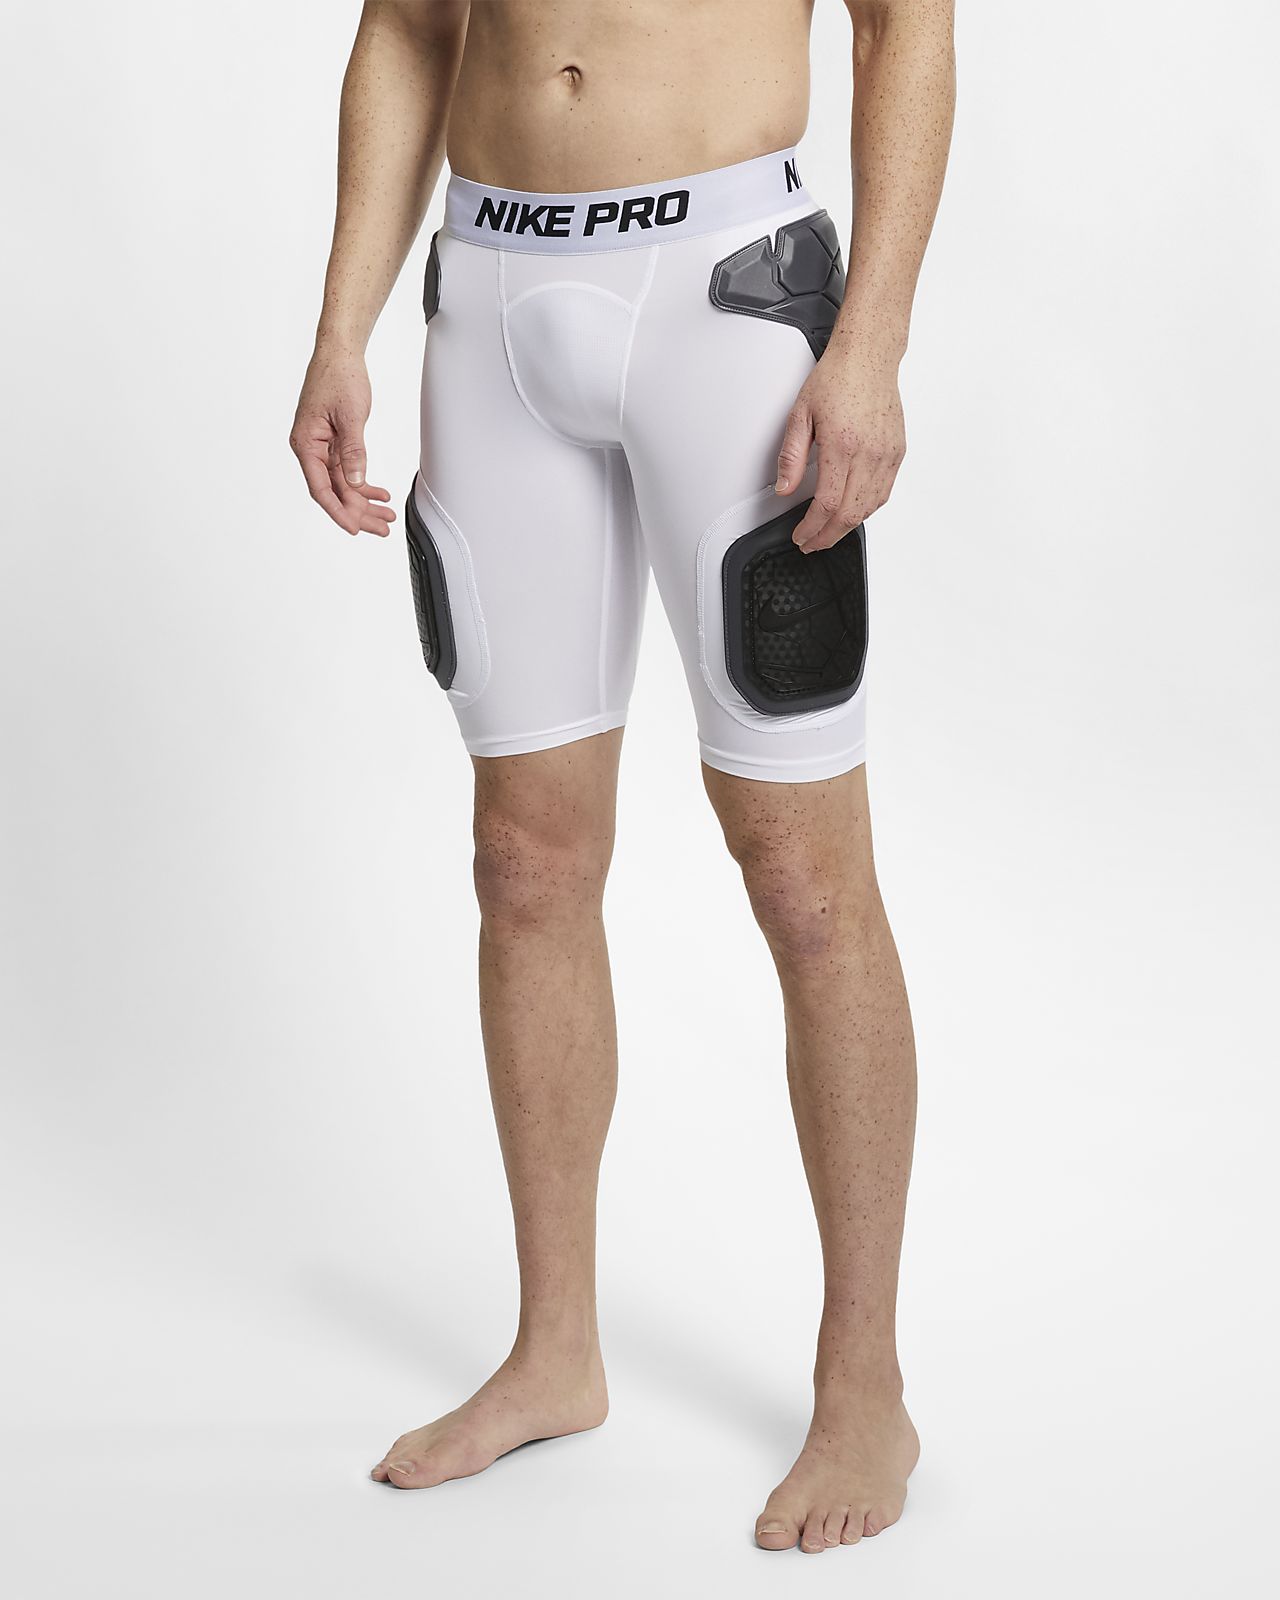 hyperstrong padded compression shorts for basketball